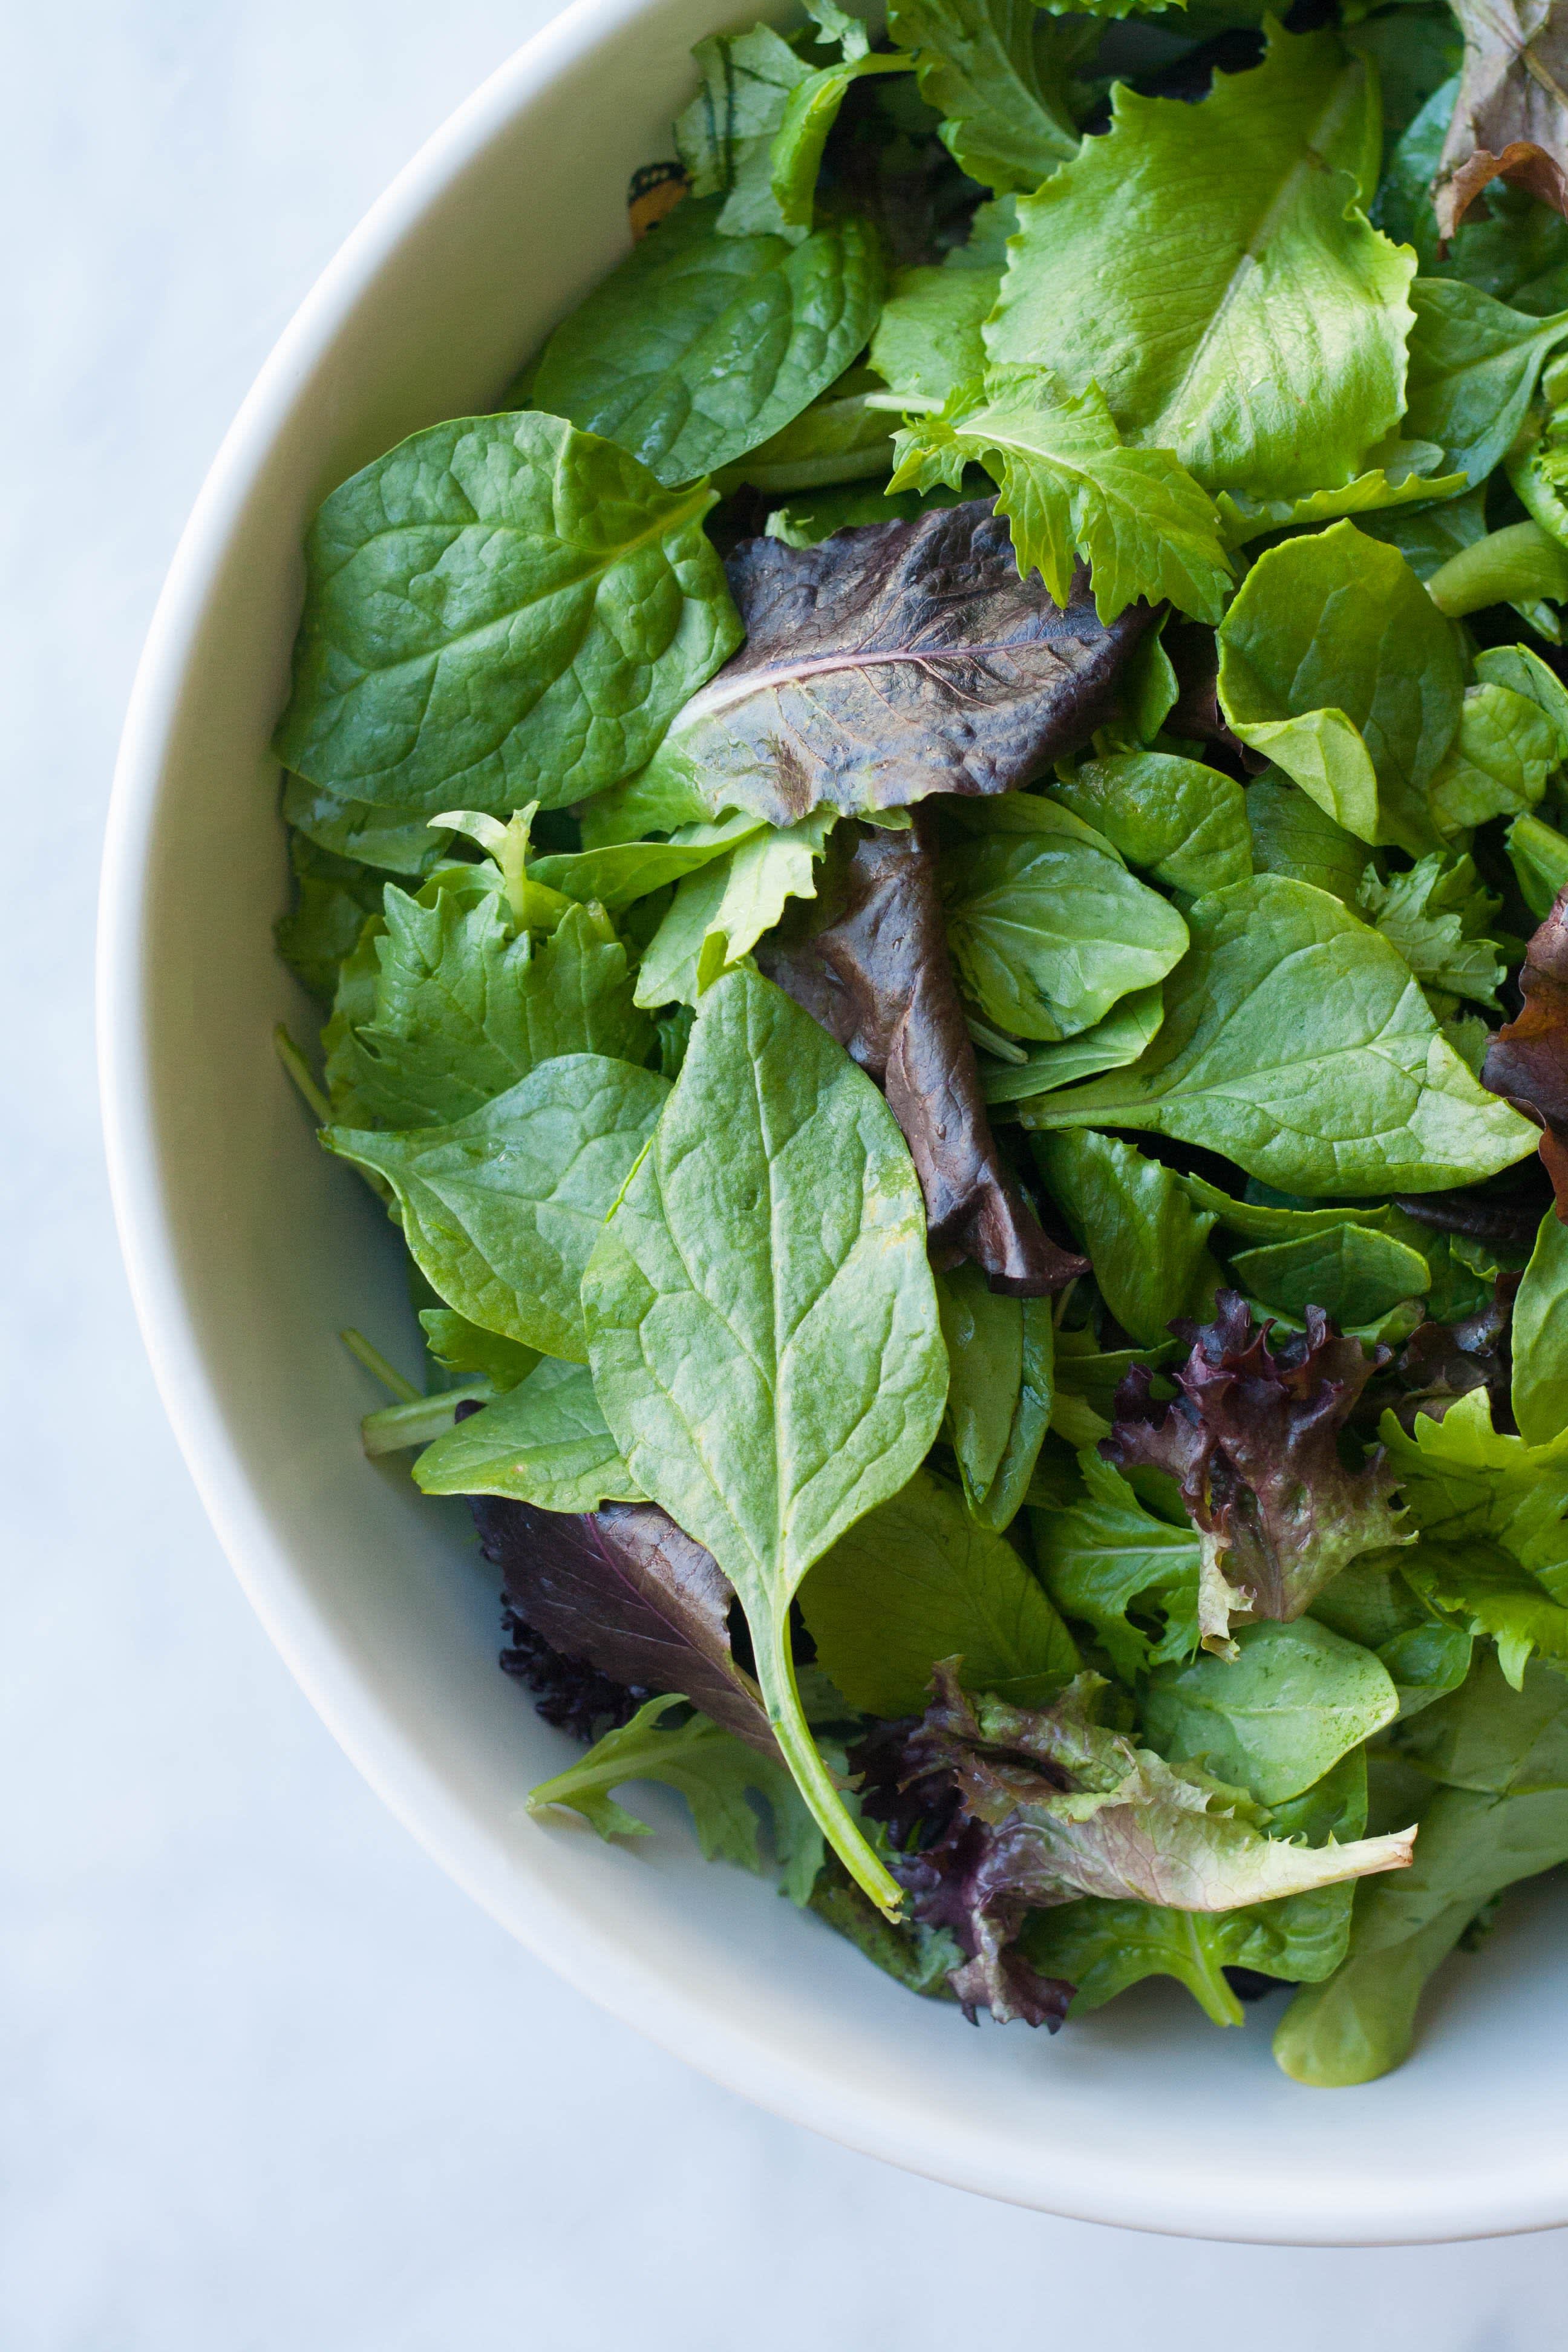 How to Keep Salad Greens Fresh - Fed & Fit